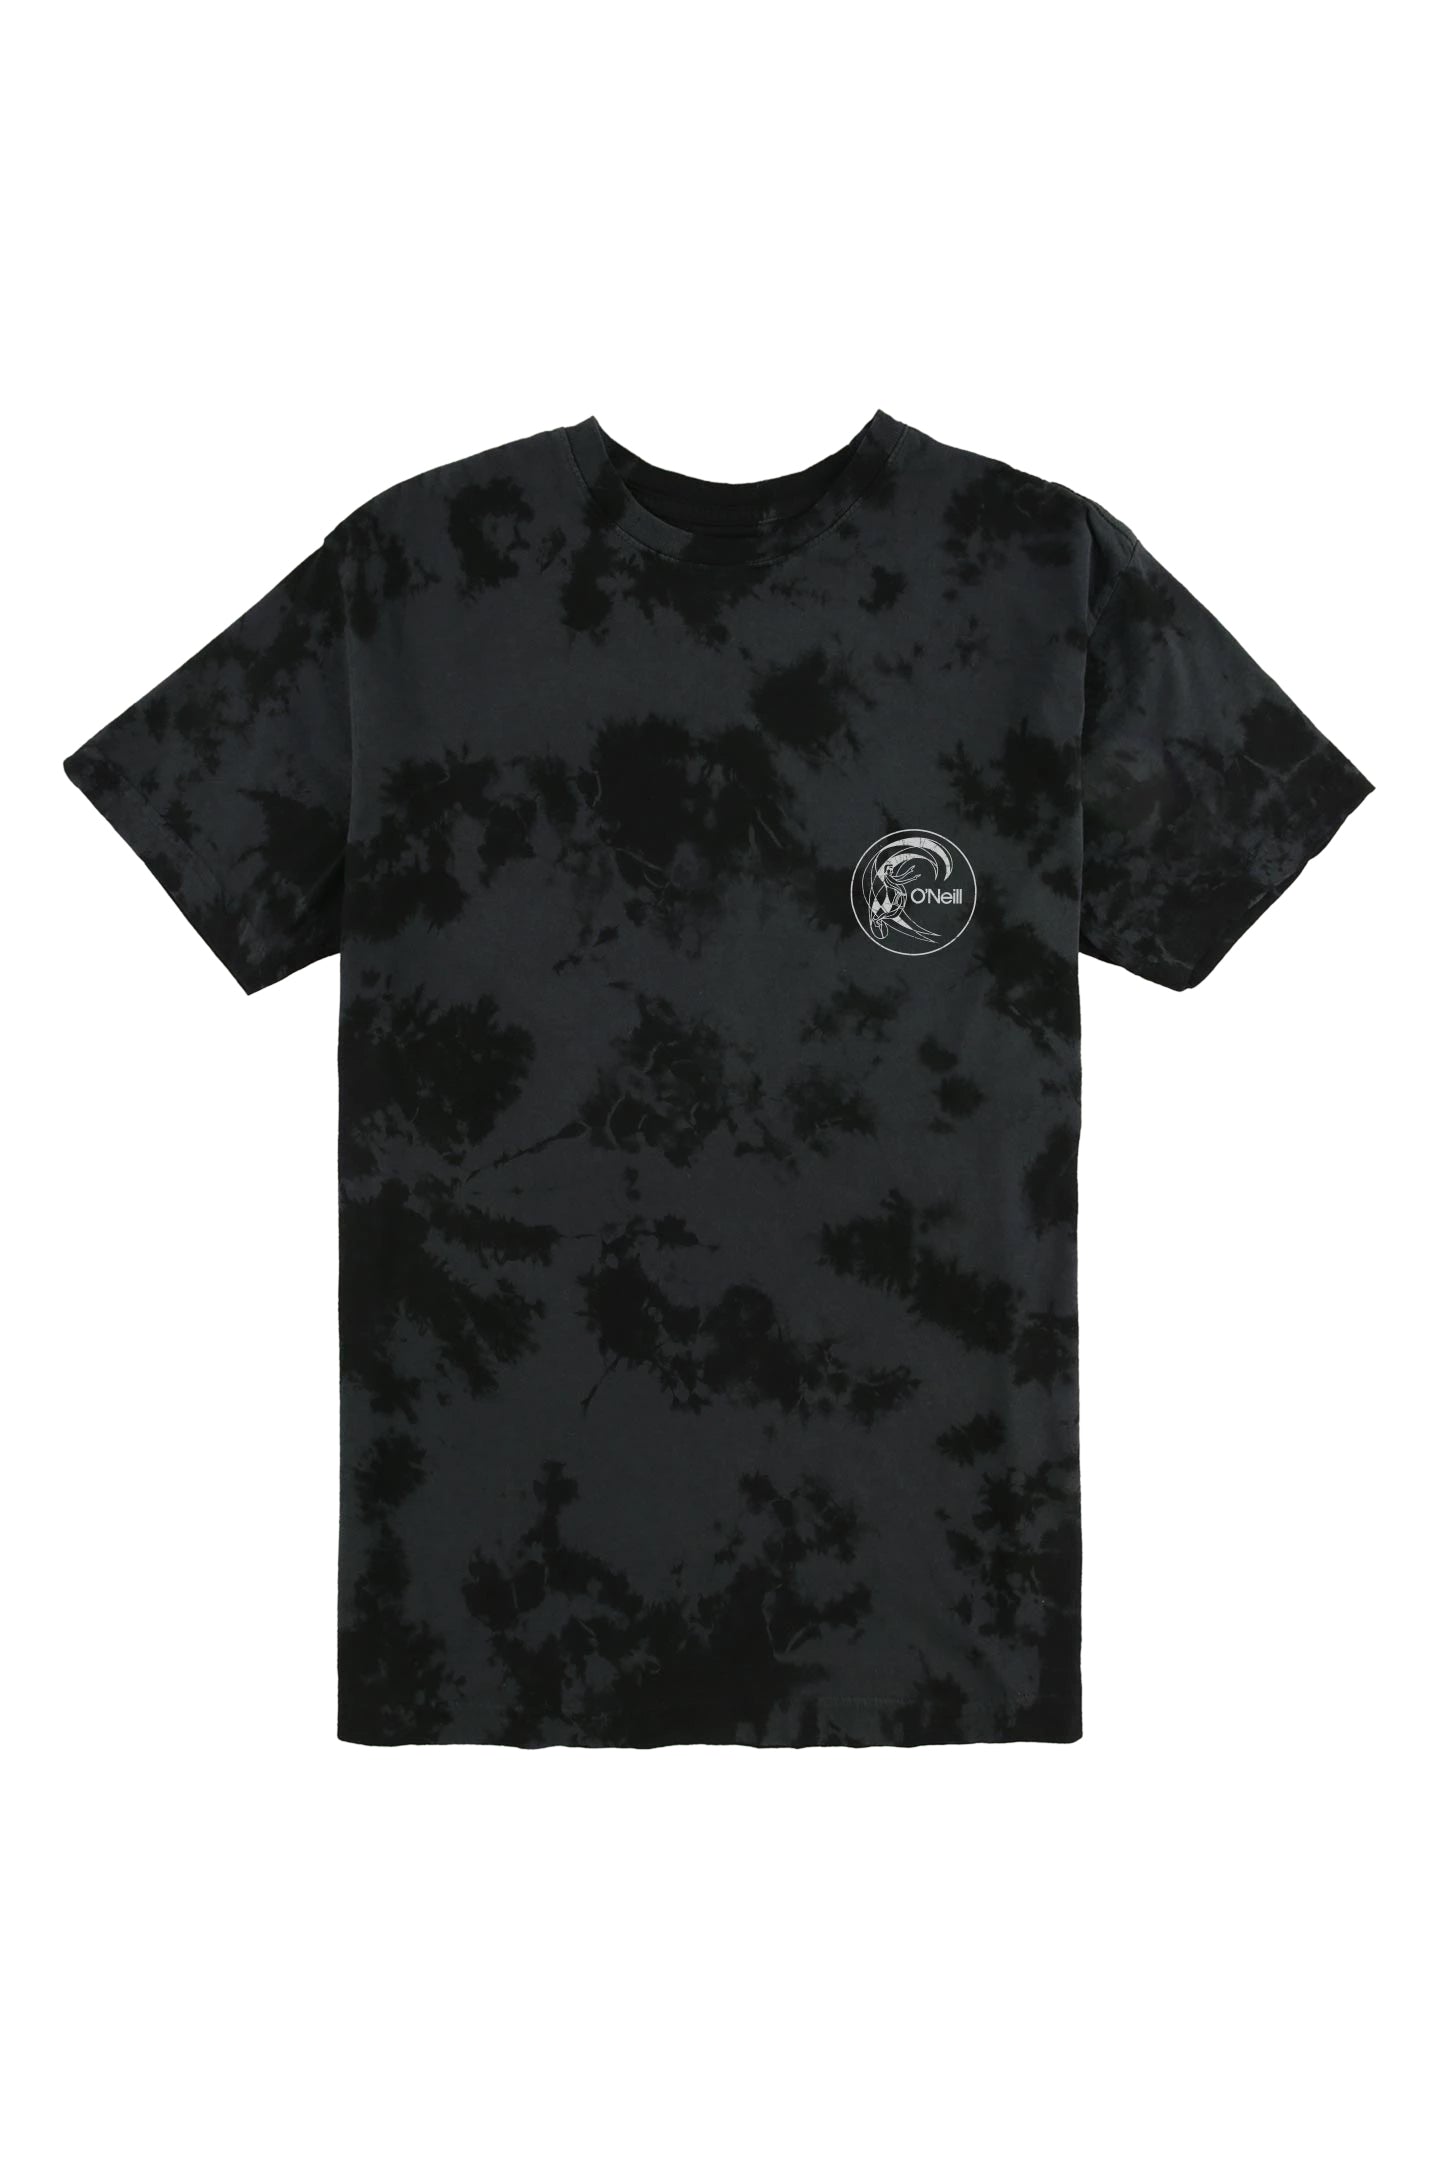 O'neill Psyched Tee DCH-DarkCharcoal M